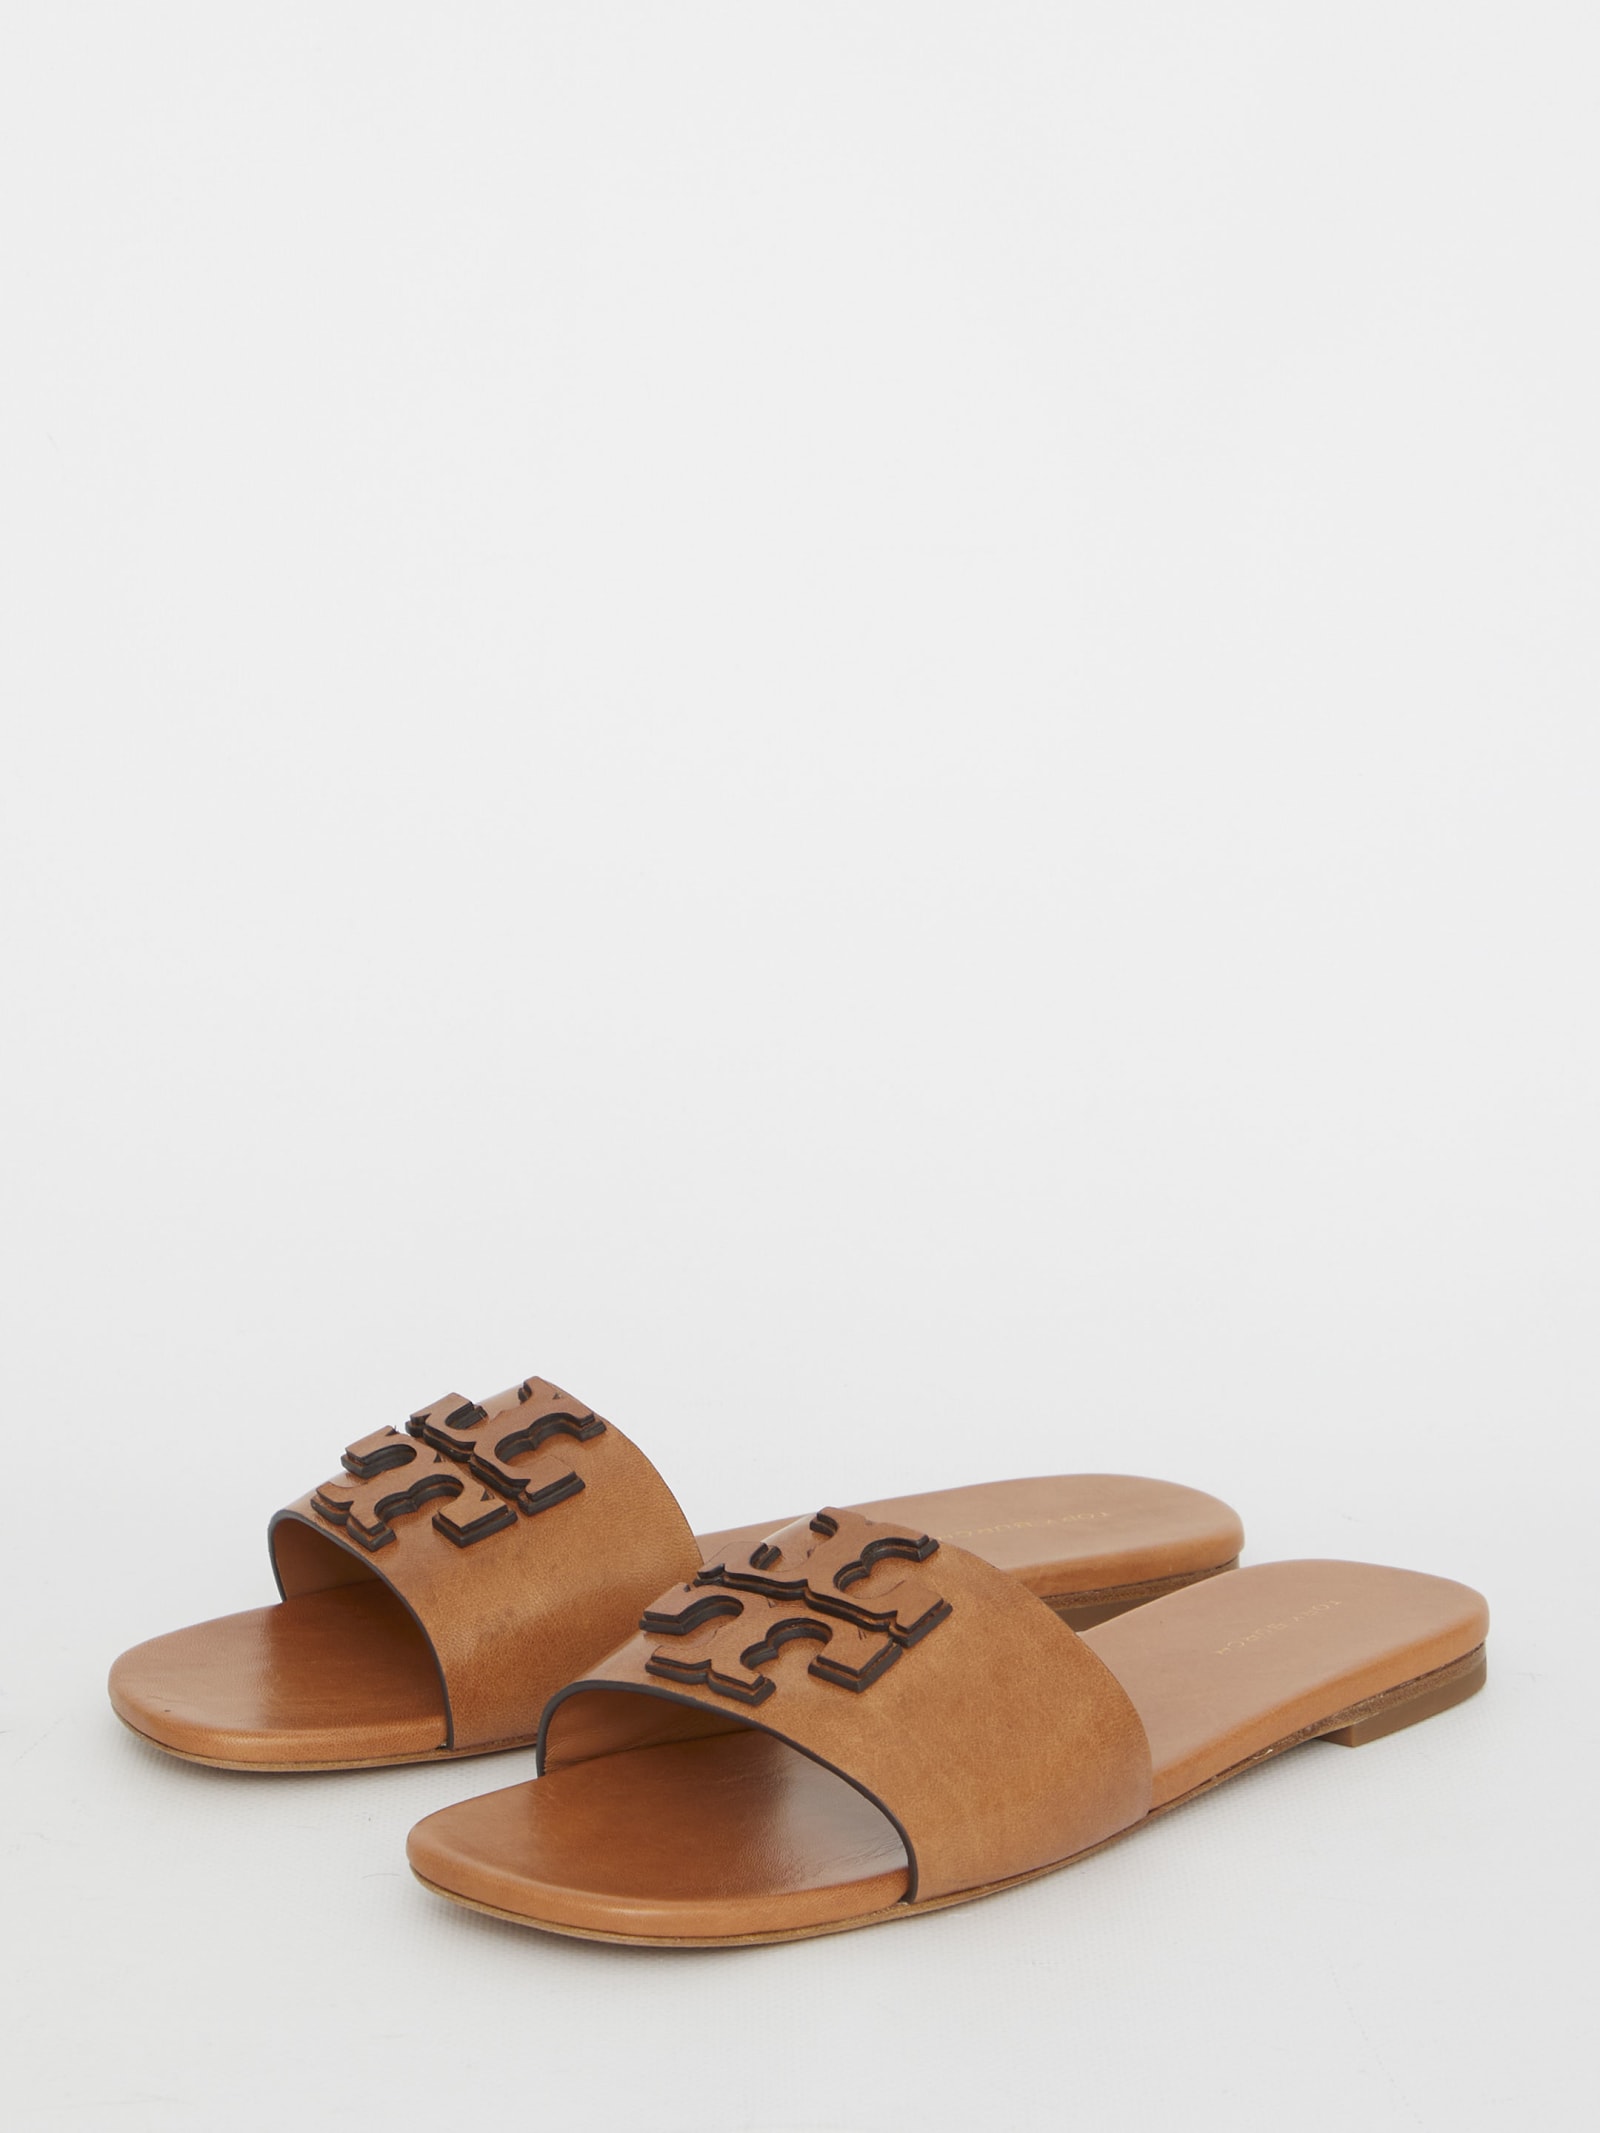 Tory Burch Double Stack Logo Slide Sandals In Camel | ModeSens